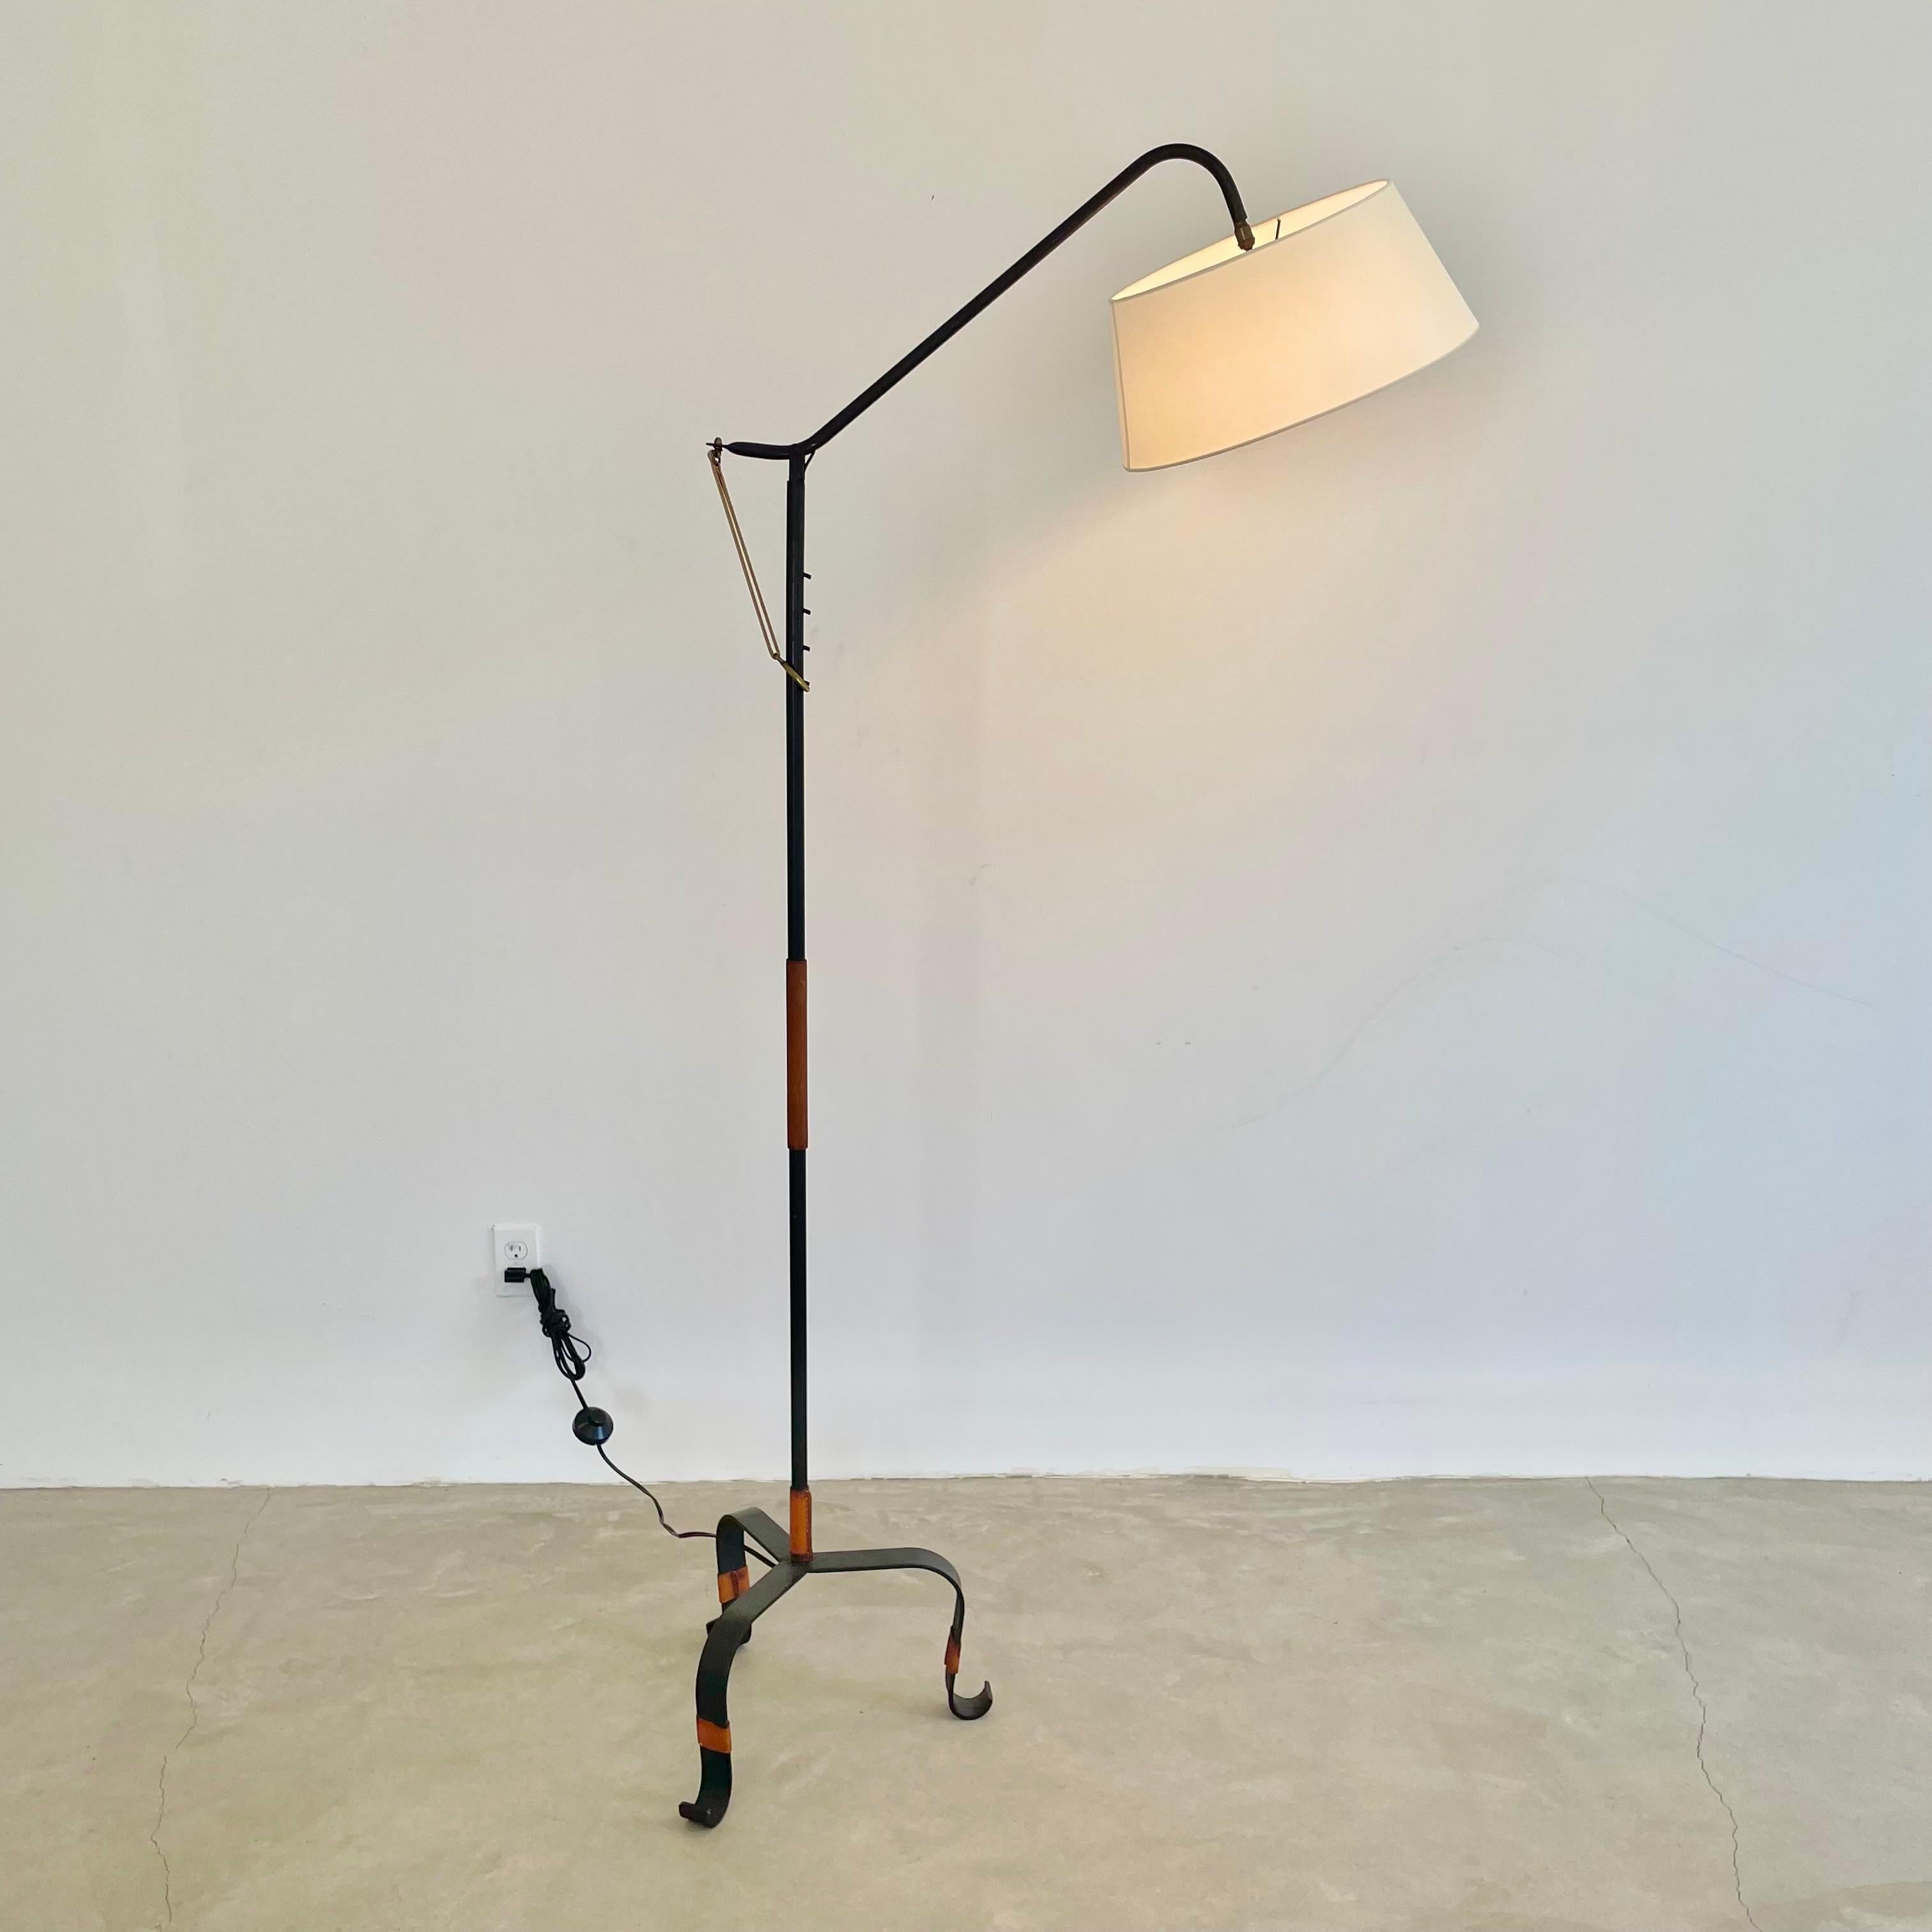 Handsome iron and leather floor lamp by French designer Jacques Adnet. Circa 1950s. Saddle leather trim on the feet and stem of the lamp. Saddle leather strap extending from the adjustable arm. This lamp has four arm heights adjustable by iron pegs